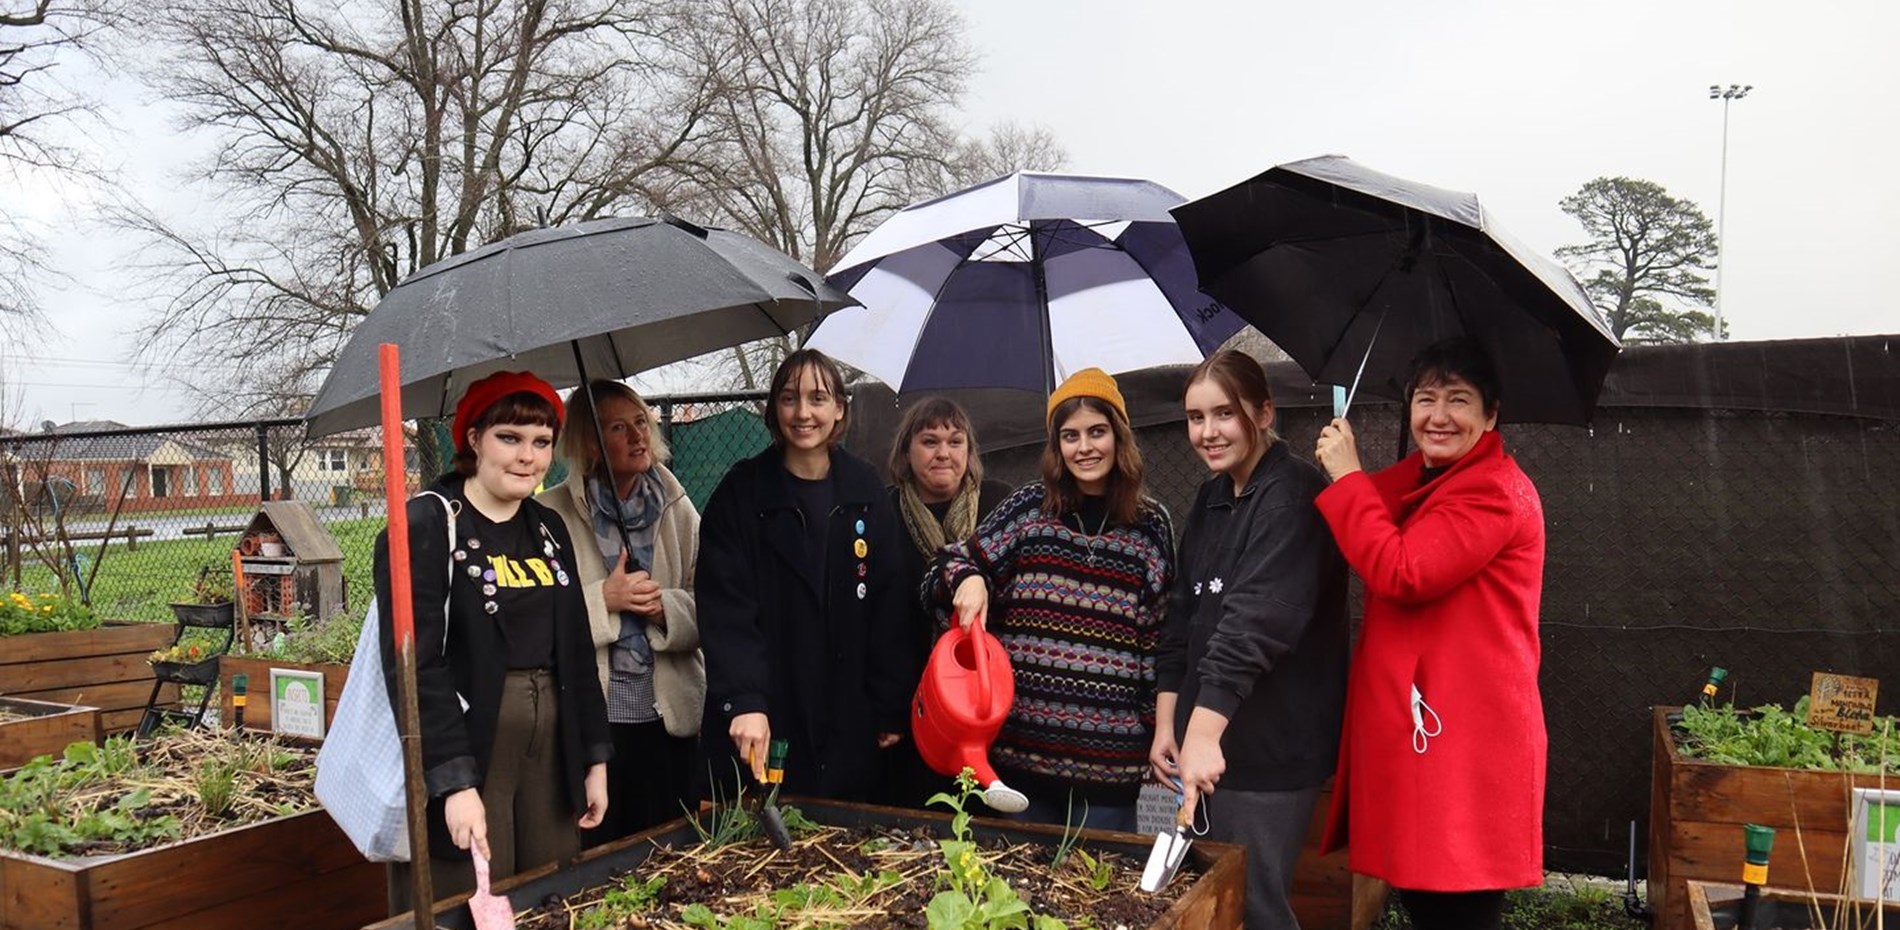 Youth garden bed launched in time for youth week Main Image